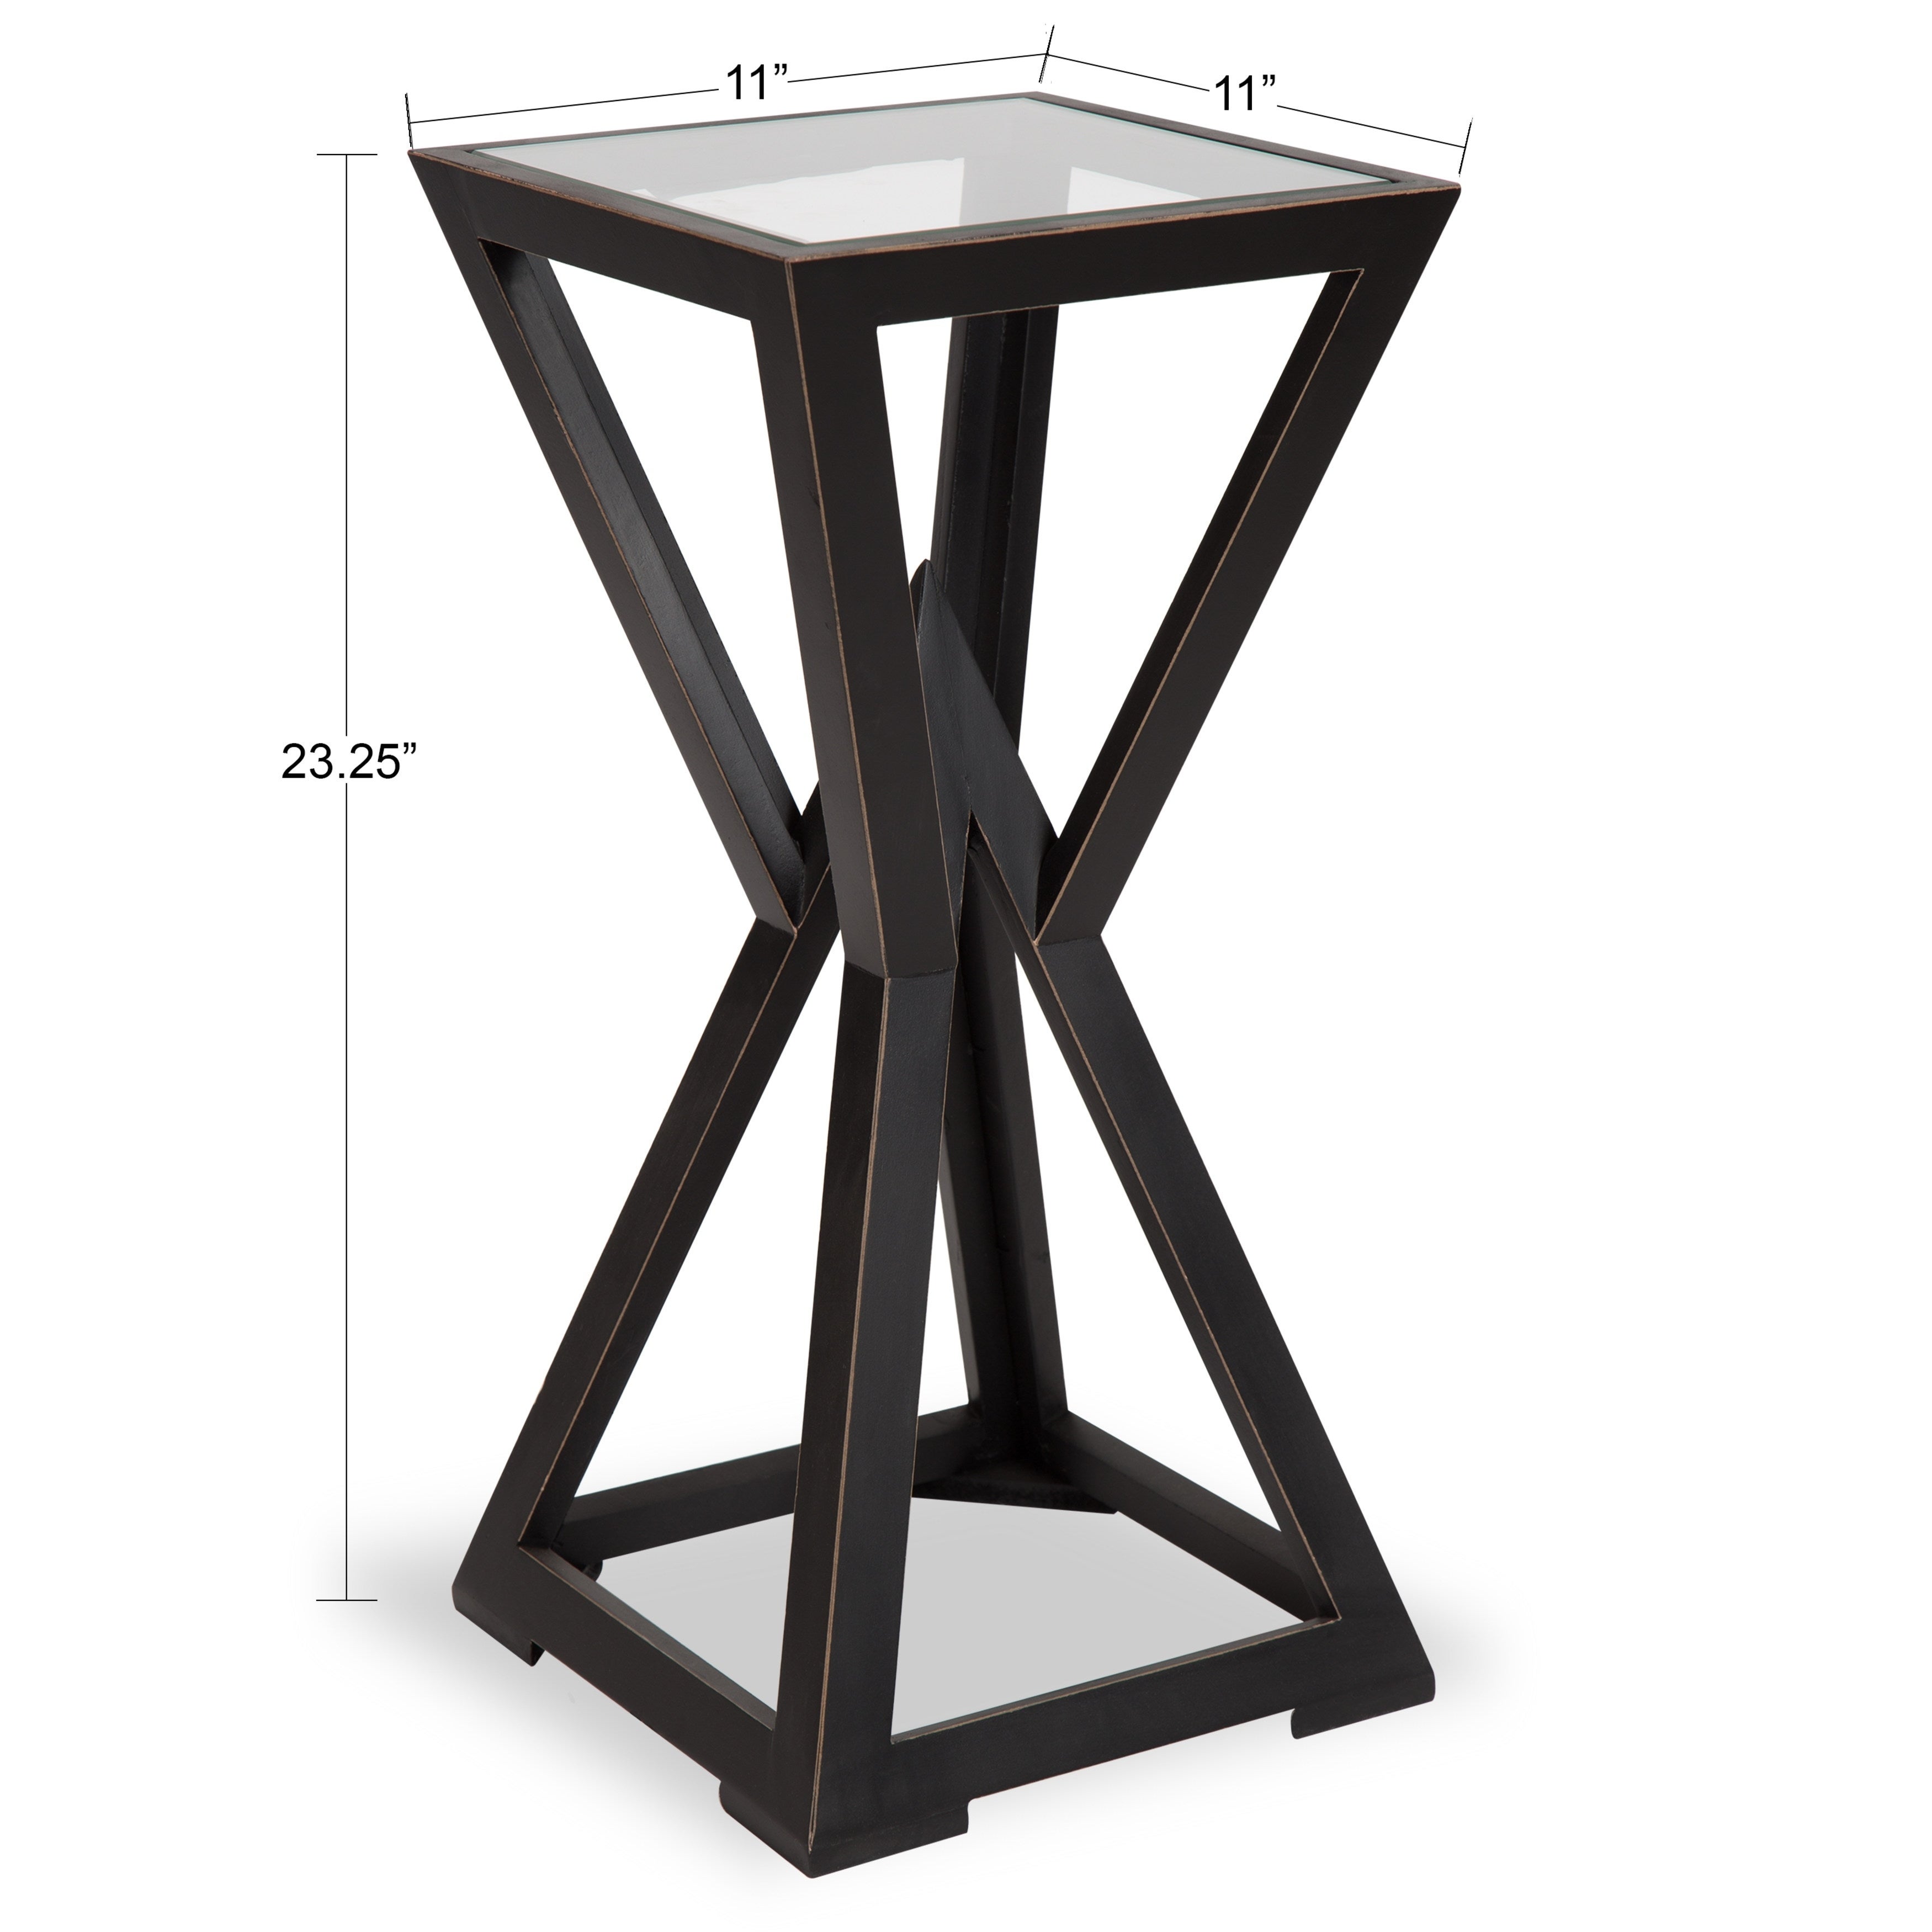 kate and laurel yogi small black wood side end table free unfinished patio furniture leick ironcraft console glass folding accent gold bedside cabinets used oak tables round